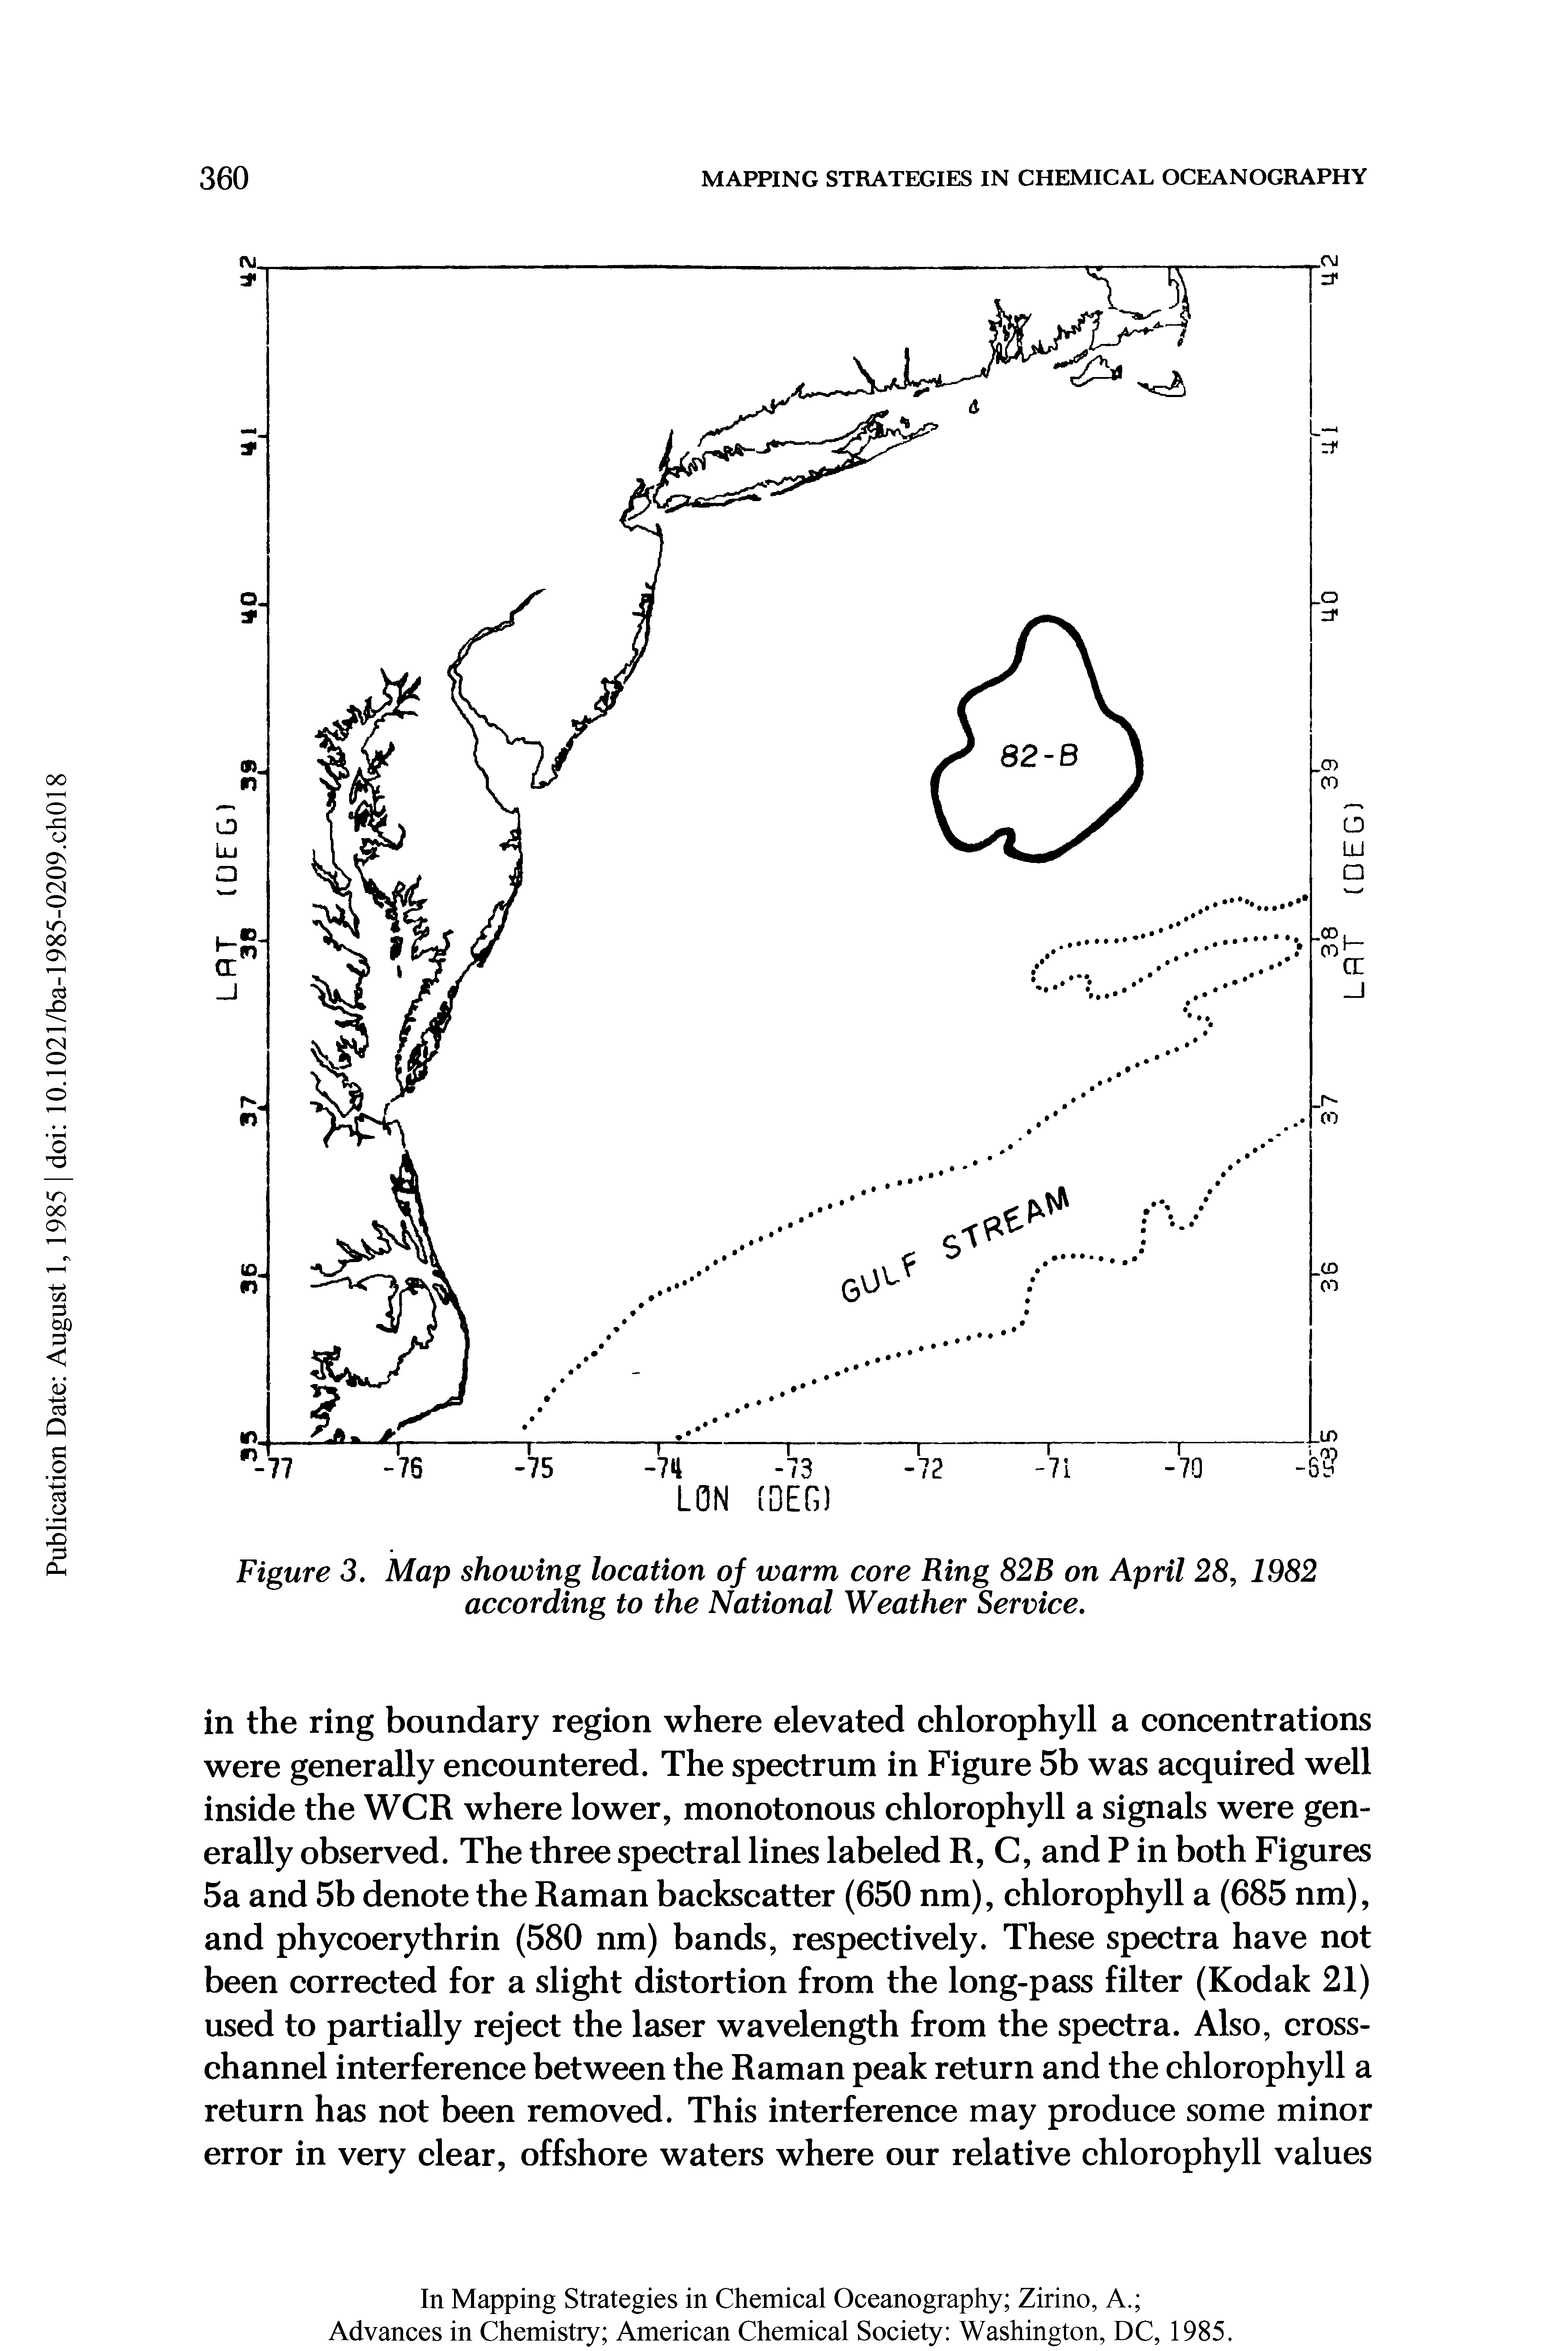 Figure 3. Map showing location of warm core Ring 82B on April 28, 1982 according to the National Weather Service.